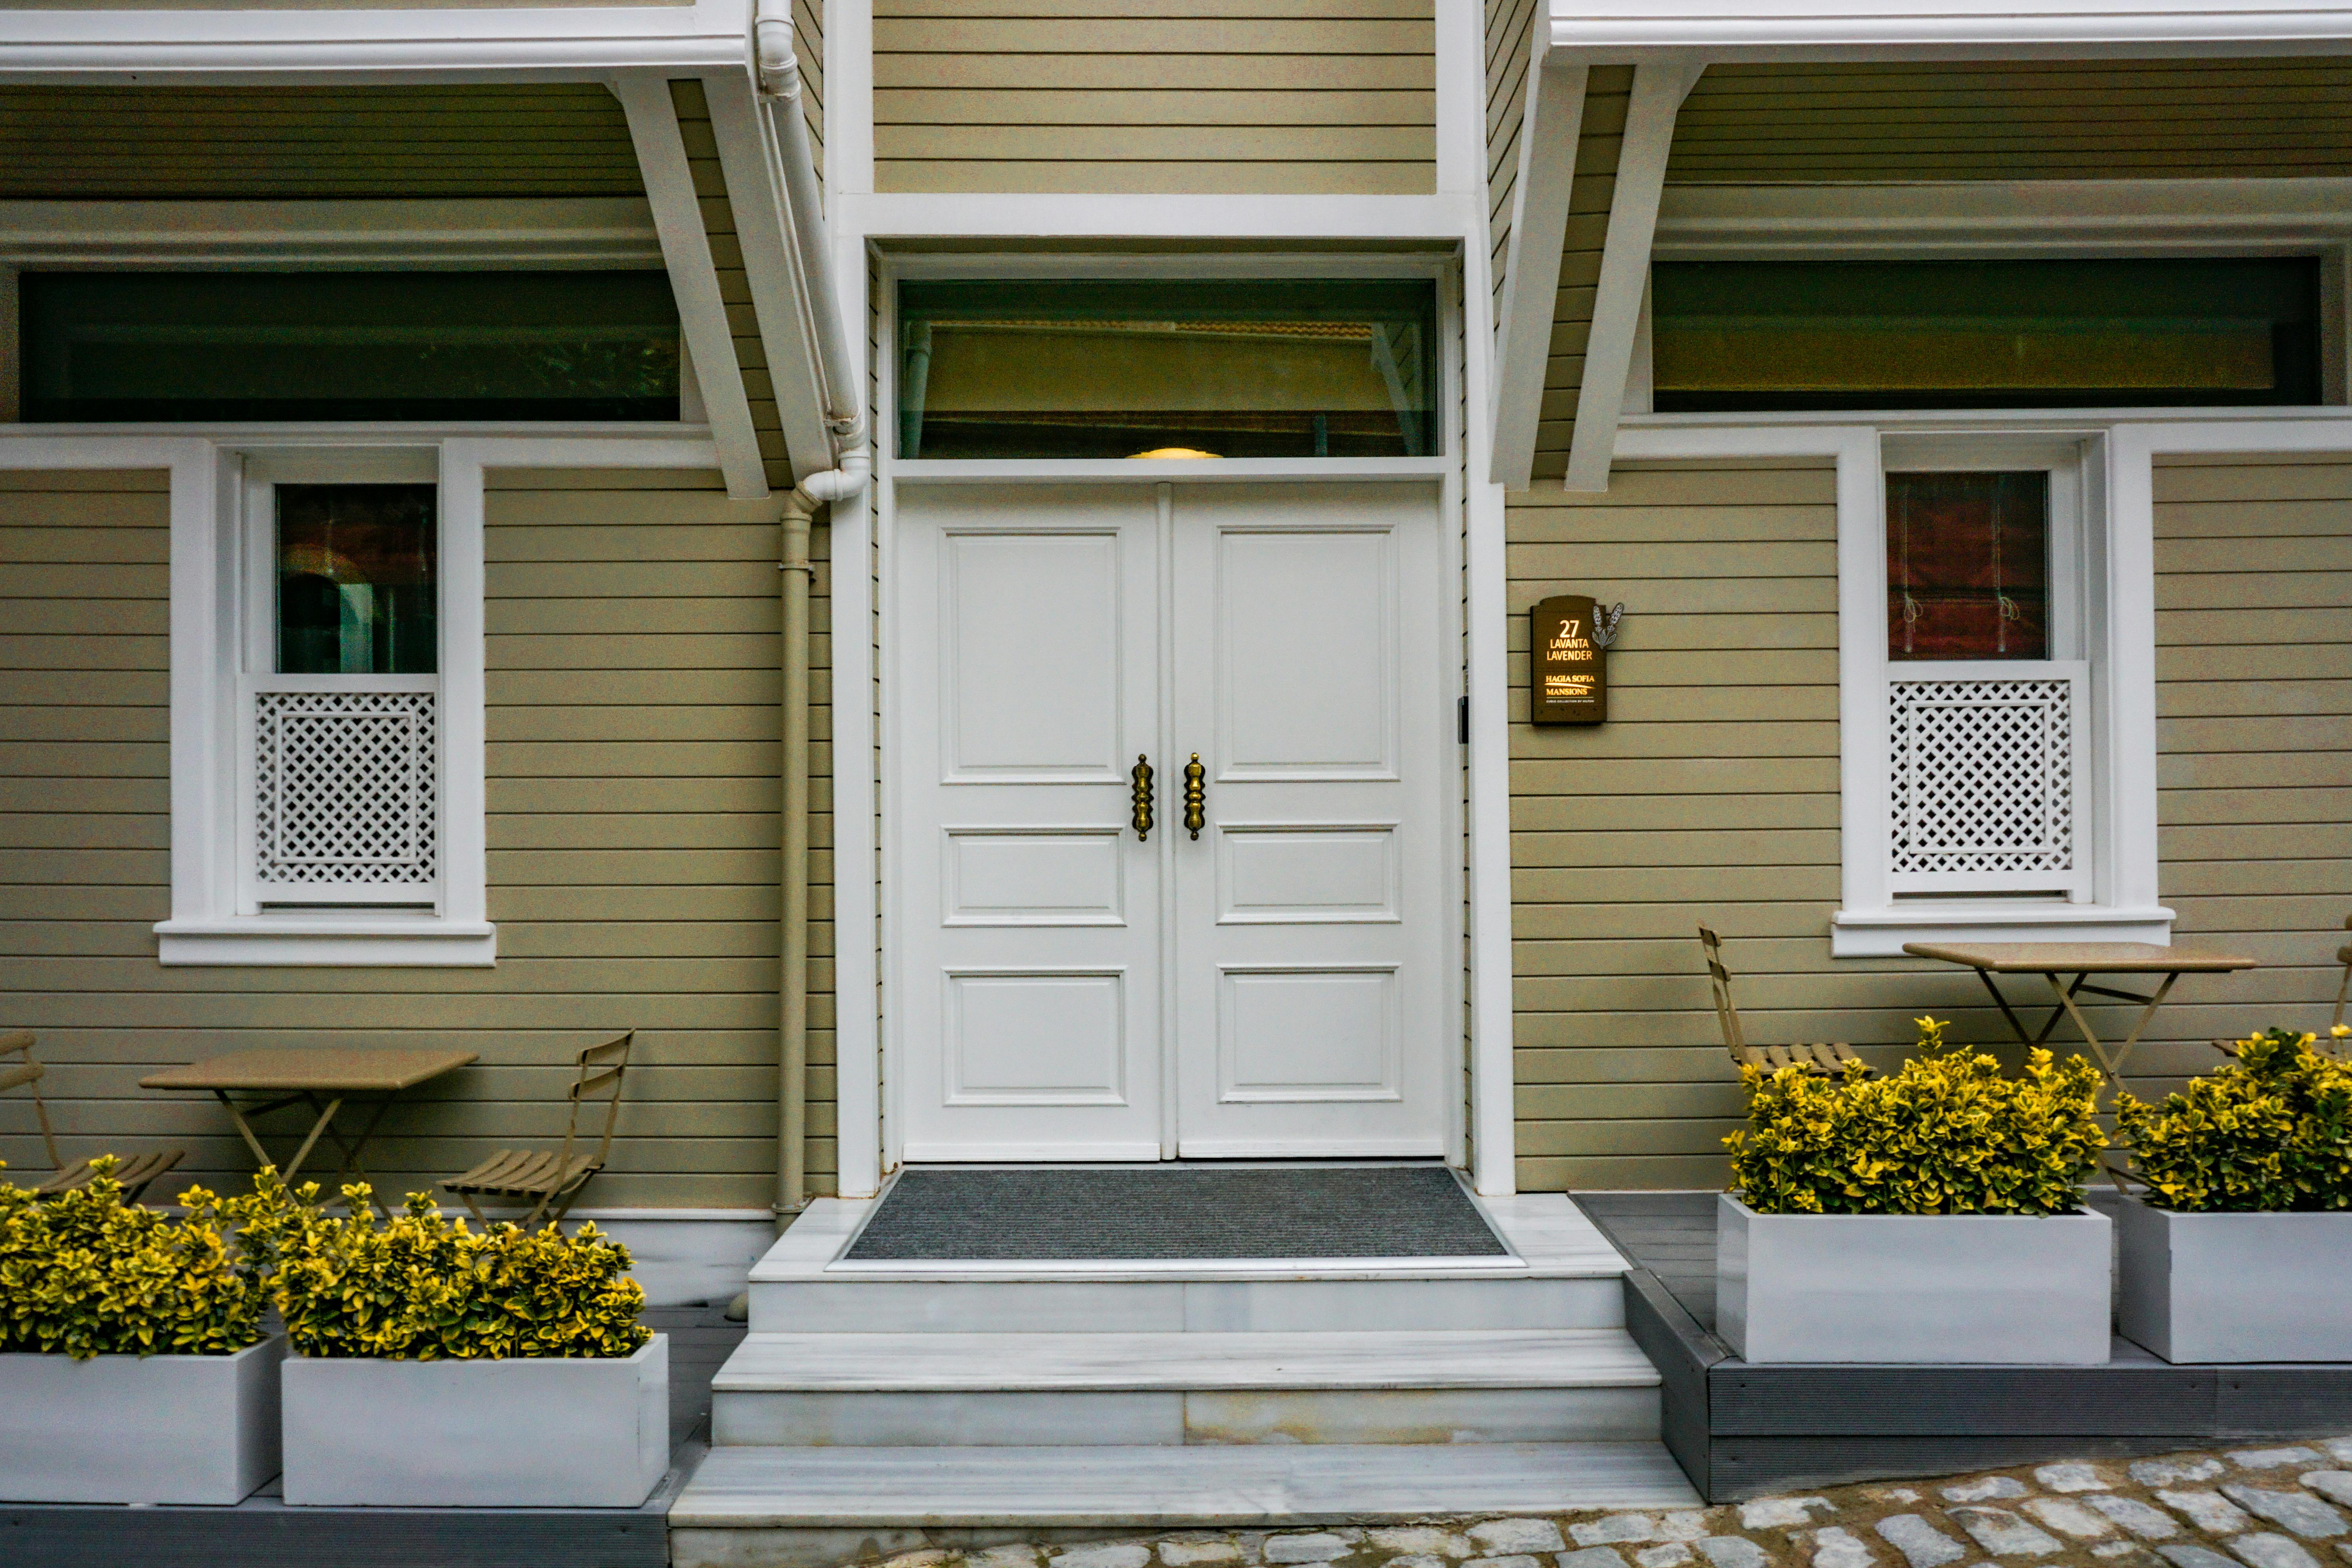 The front of a renovated house | Source: Pexels